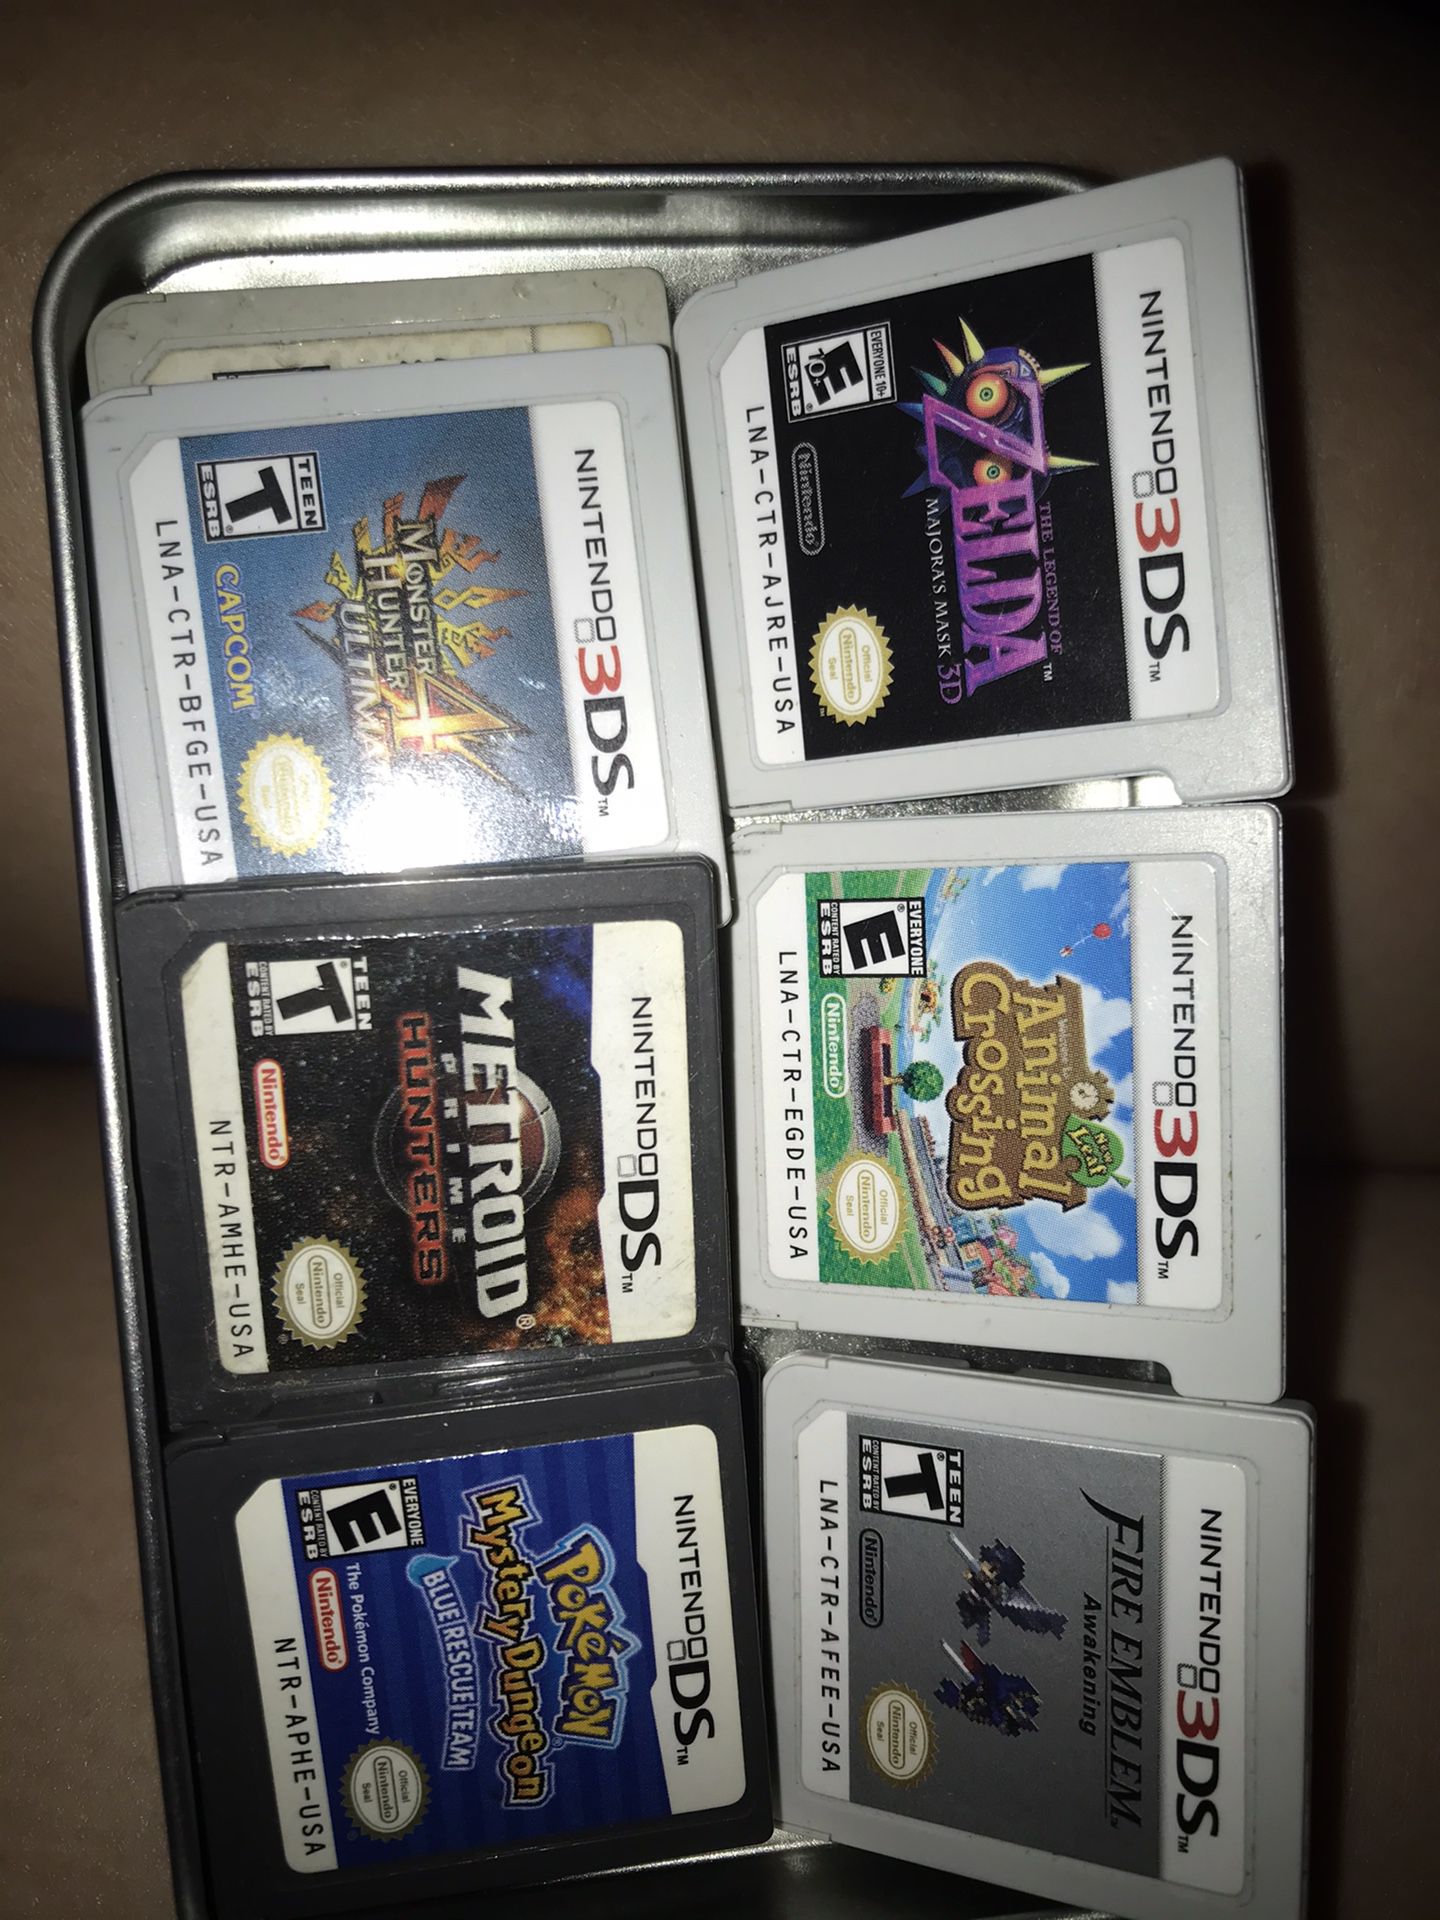 Nintendo 3DS or DS games